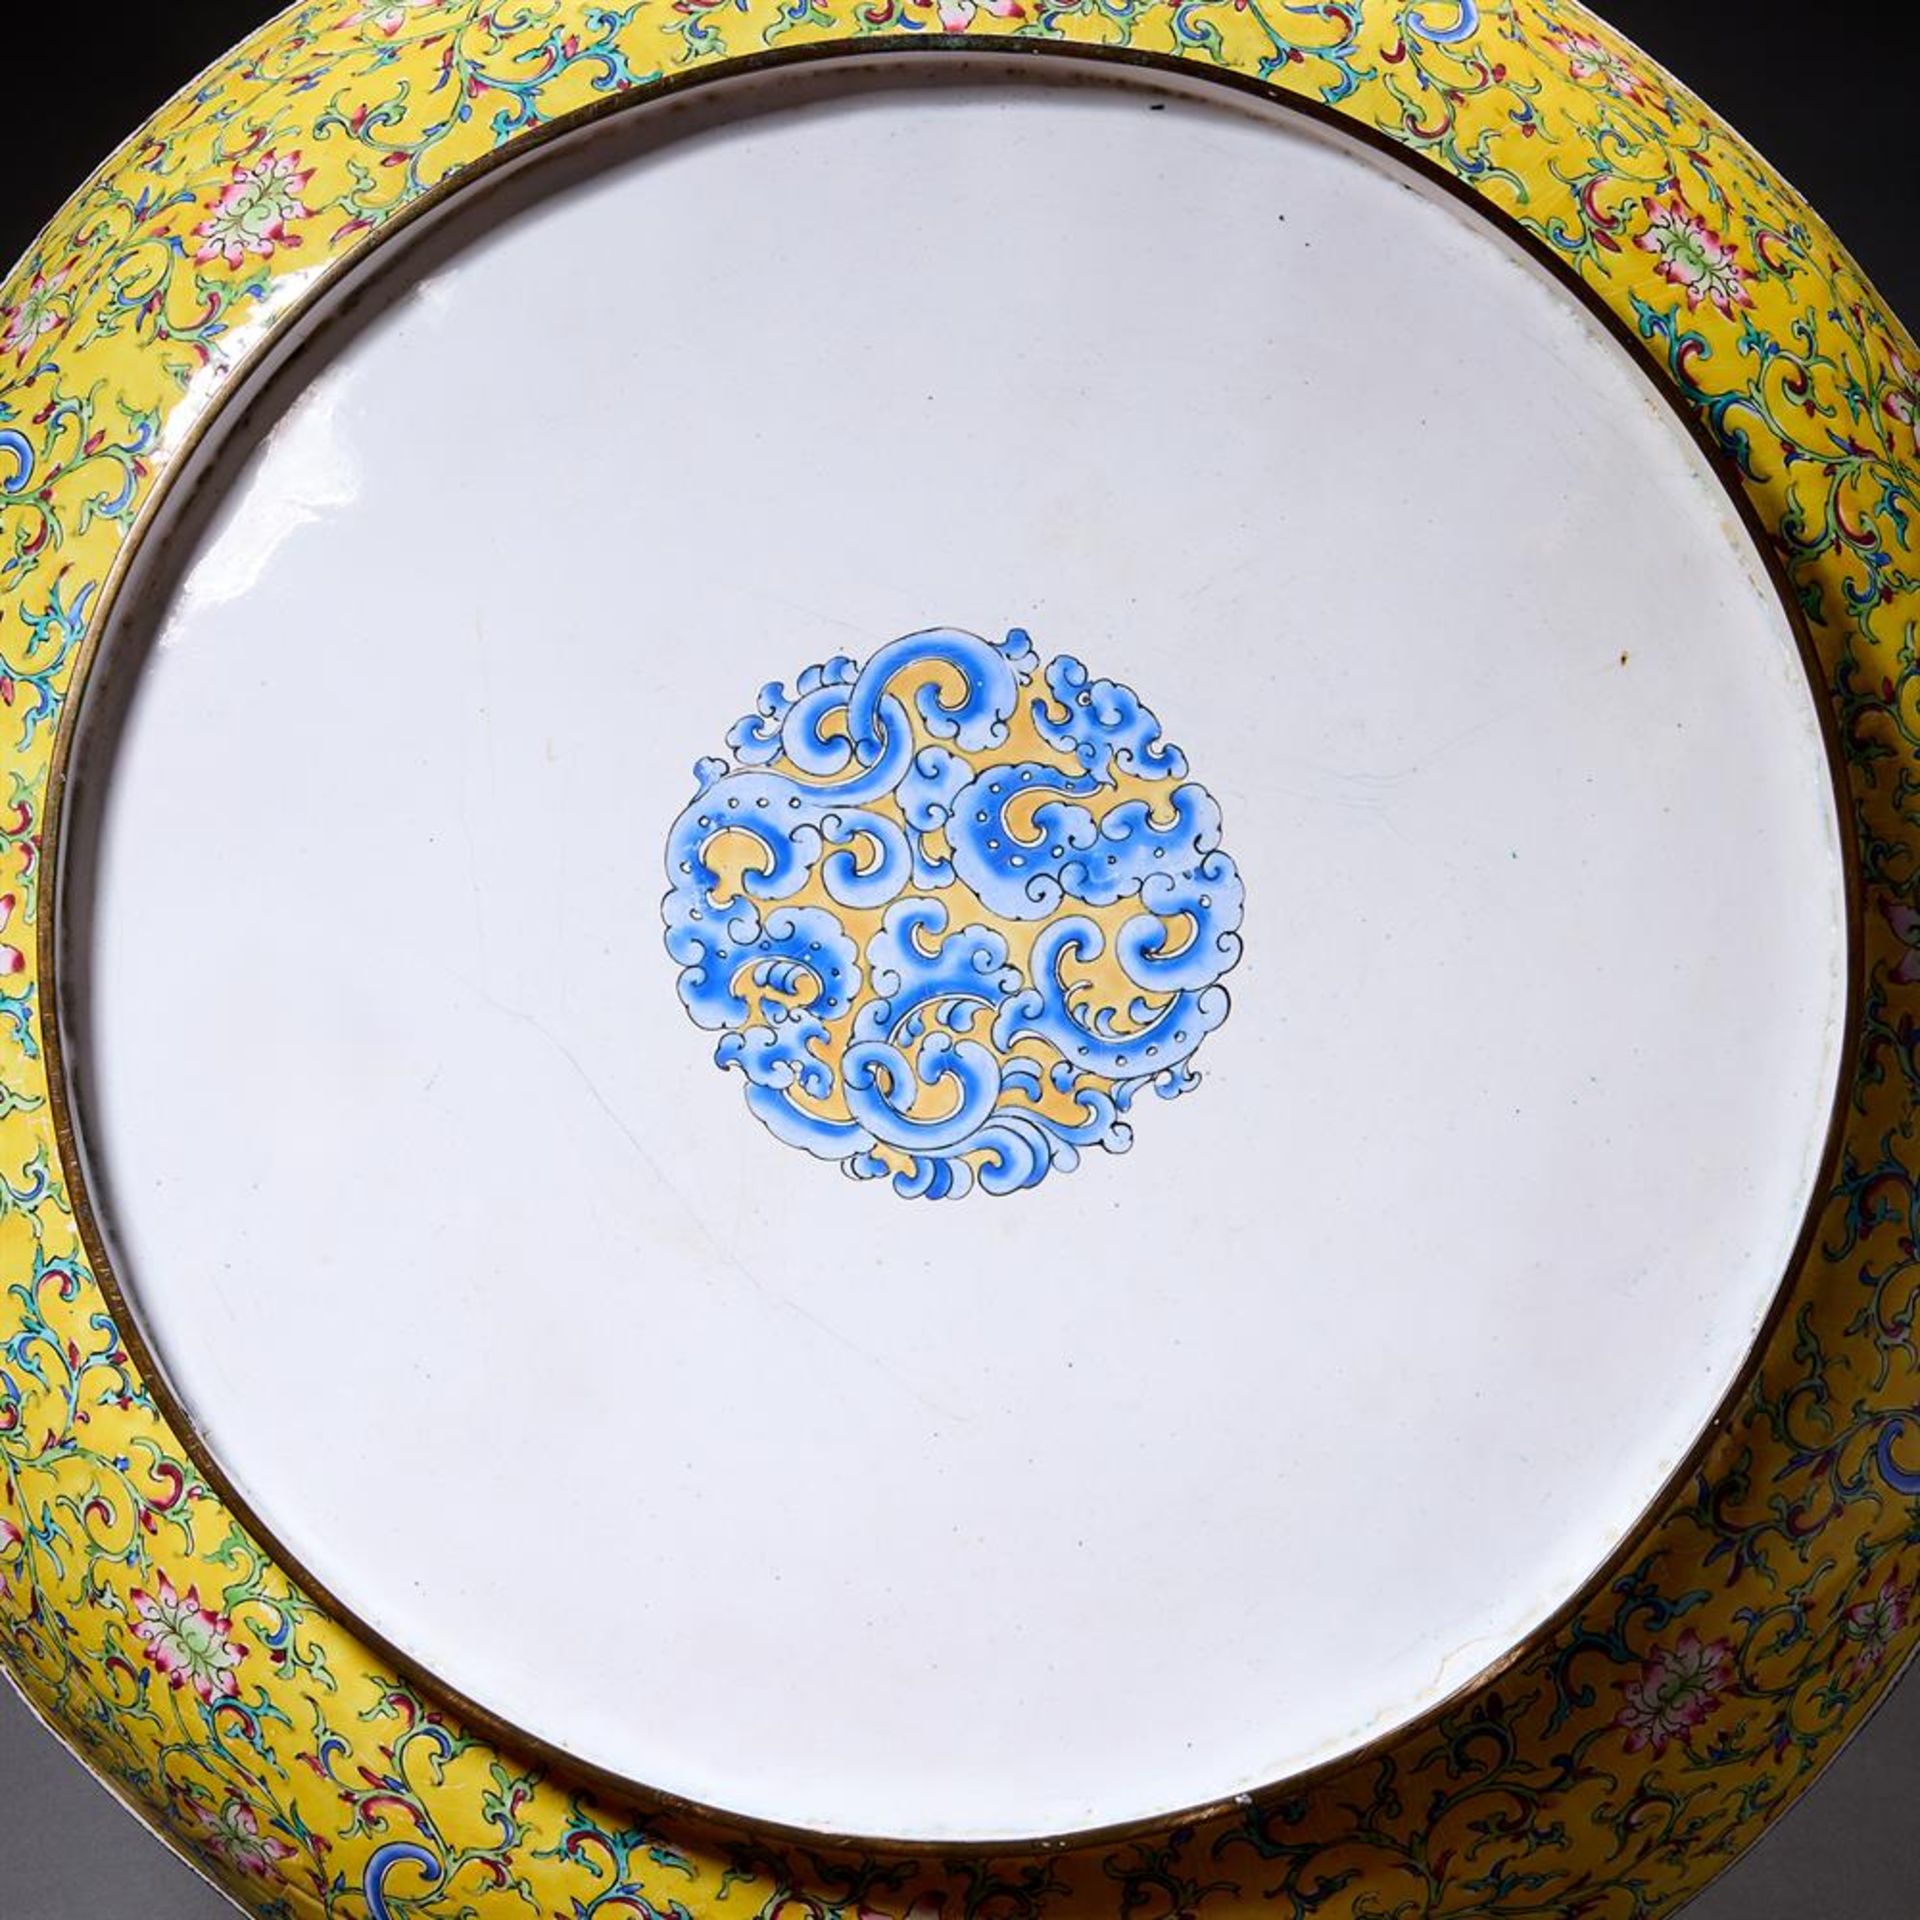 A LARGE CANTON ENAMEL 'FIVE SCHOLARS' DISH, QING DYNASTY - Image 2 of 5